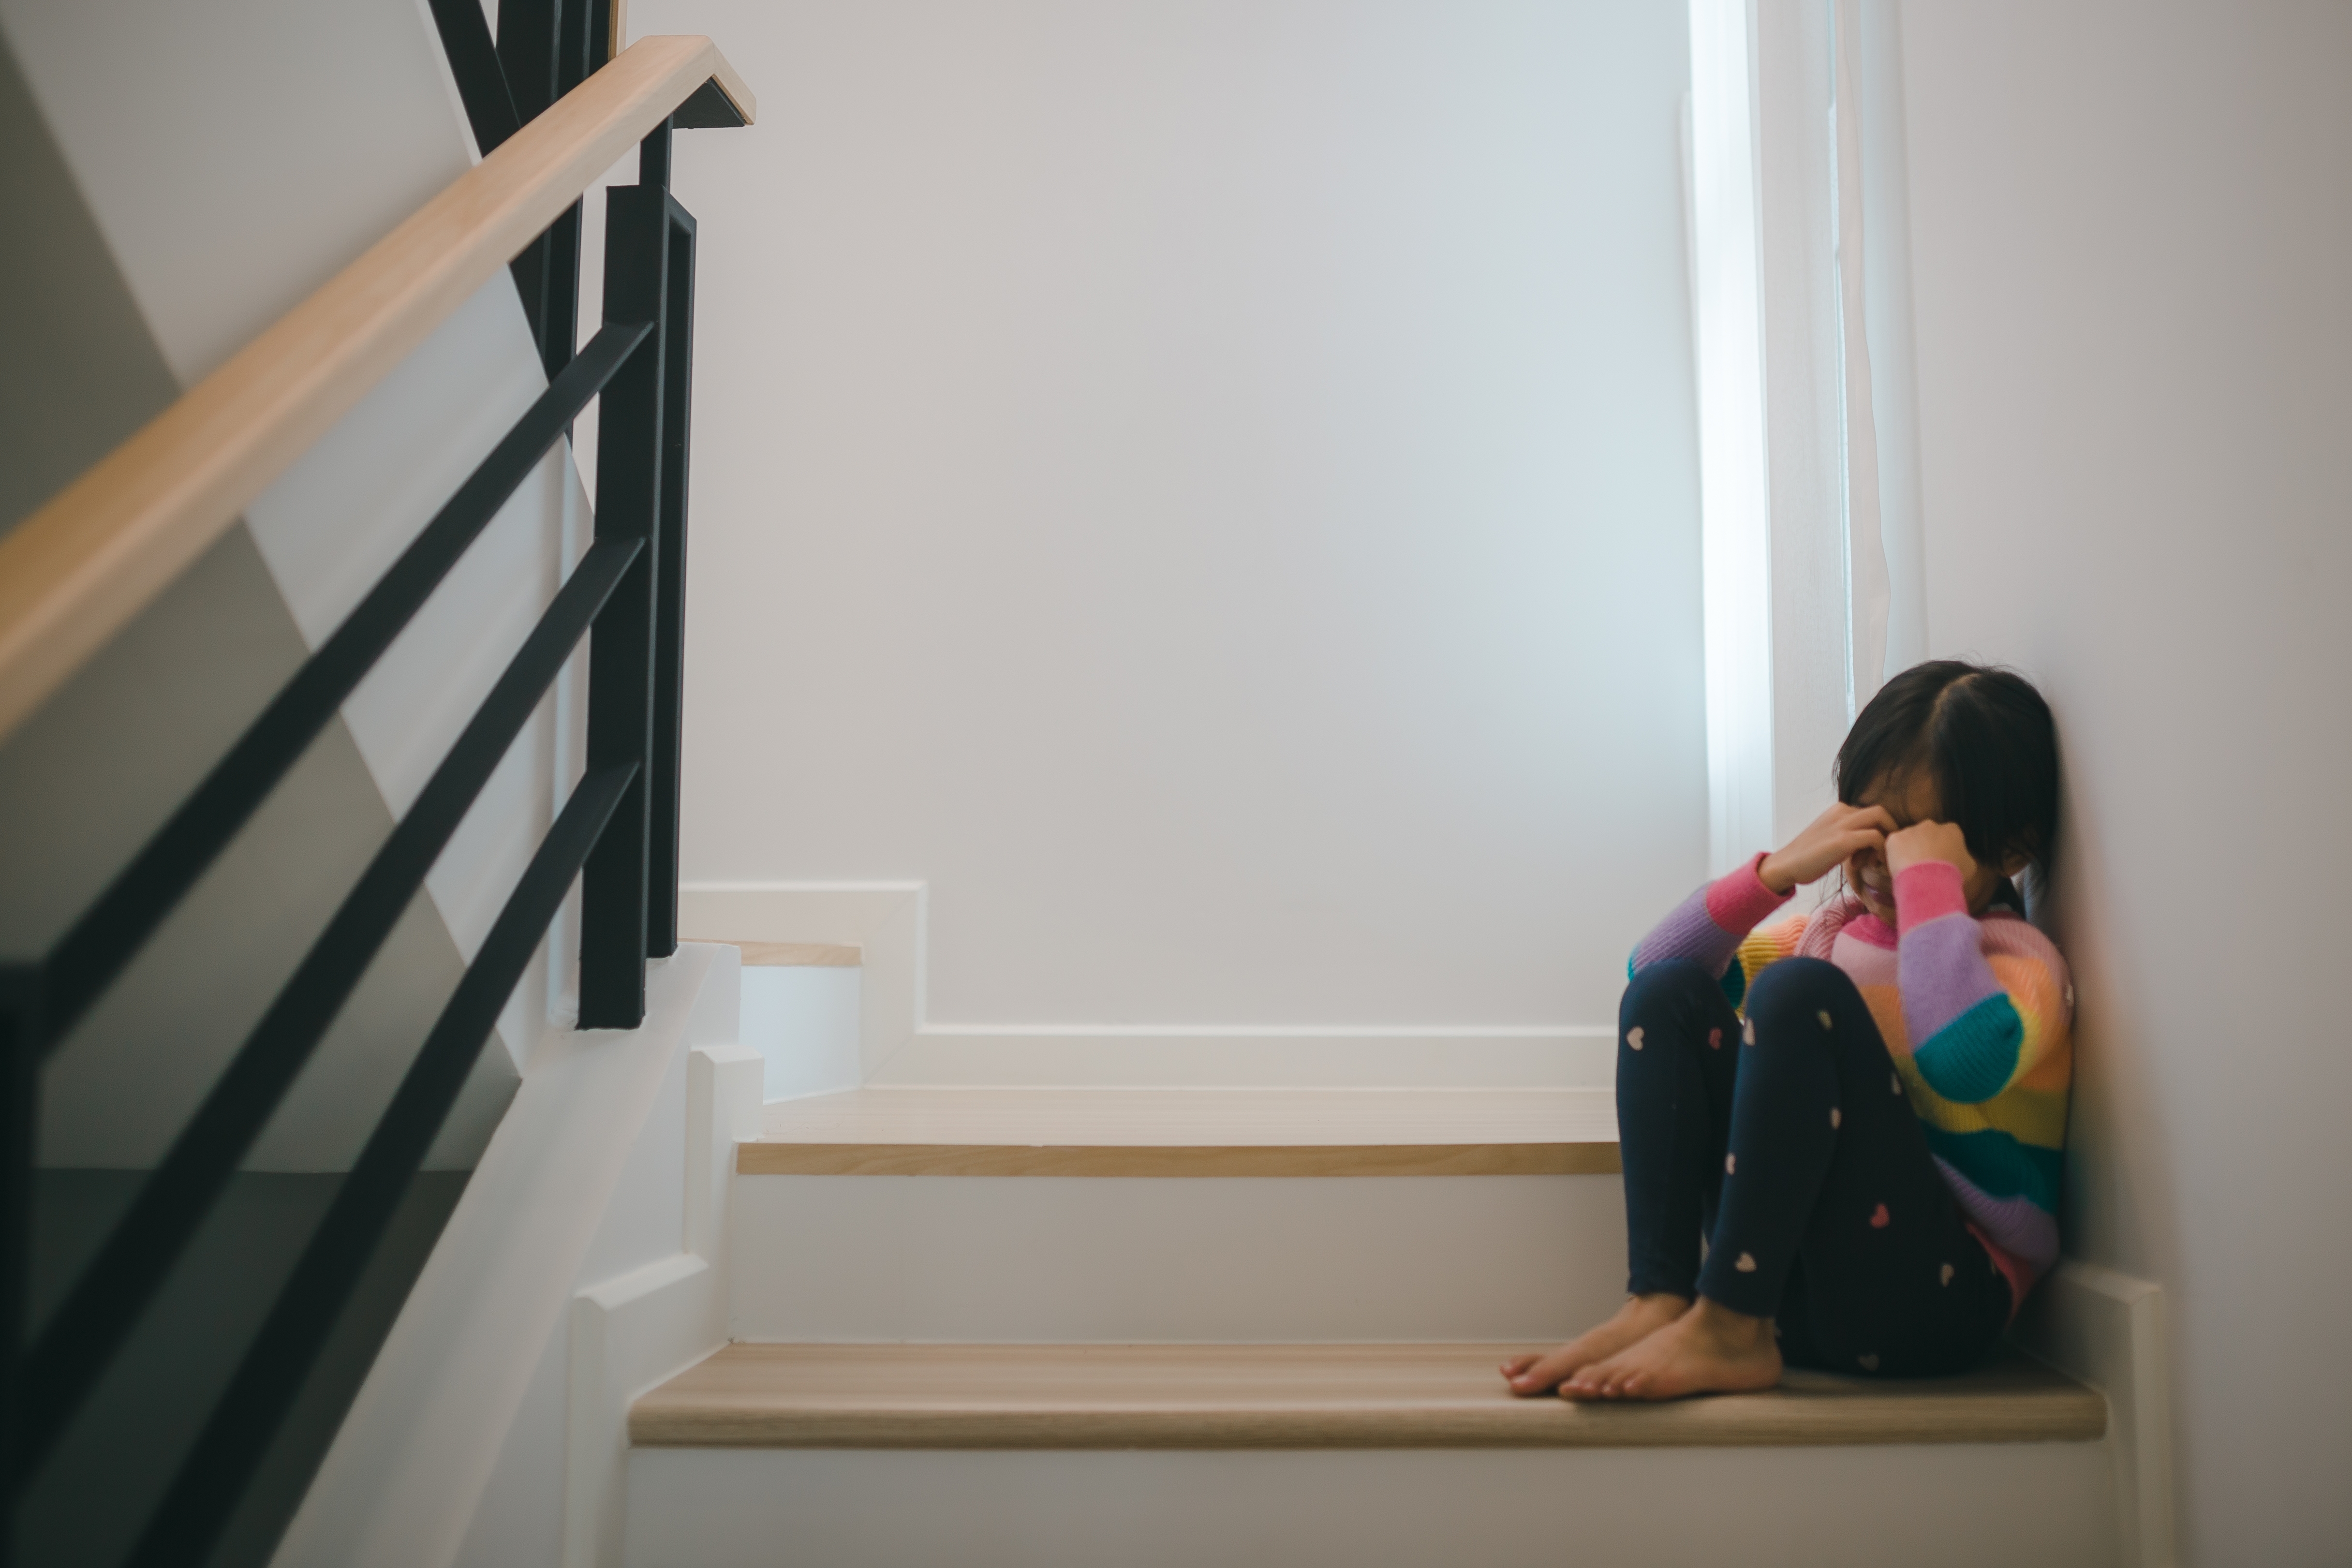 A child crying on the stairs | Source: Shutterstock